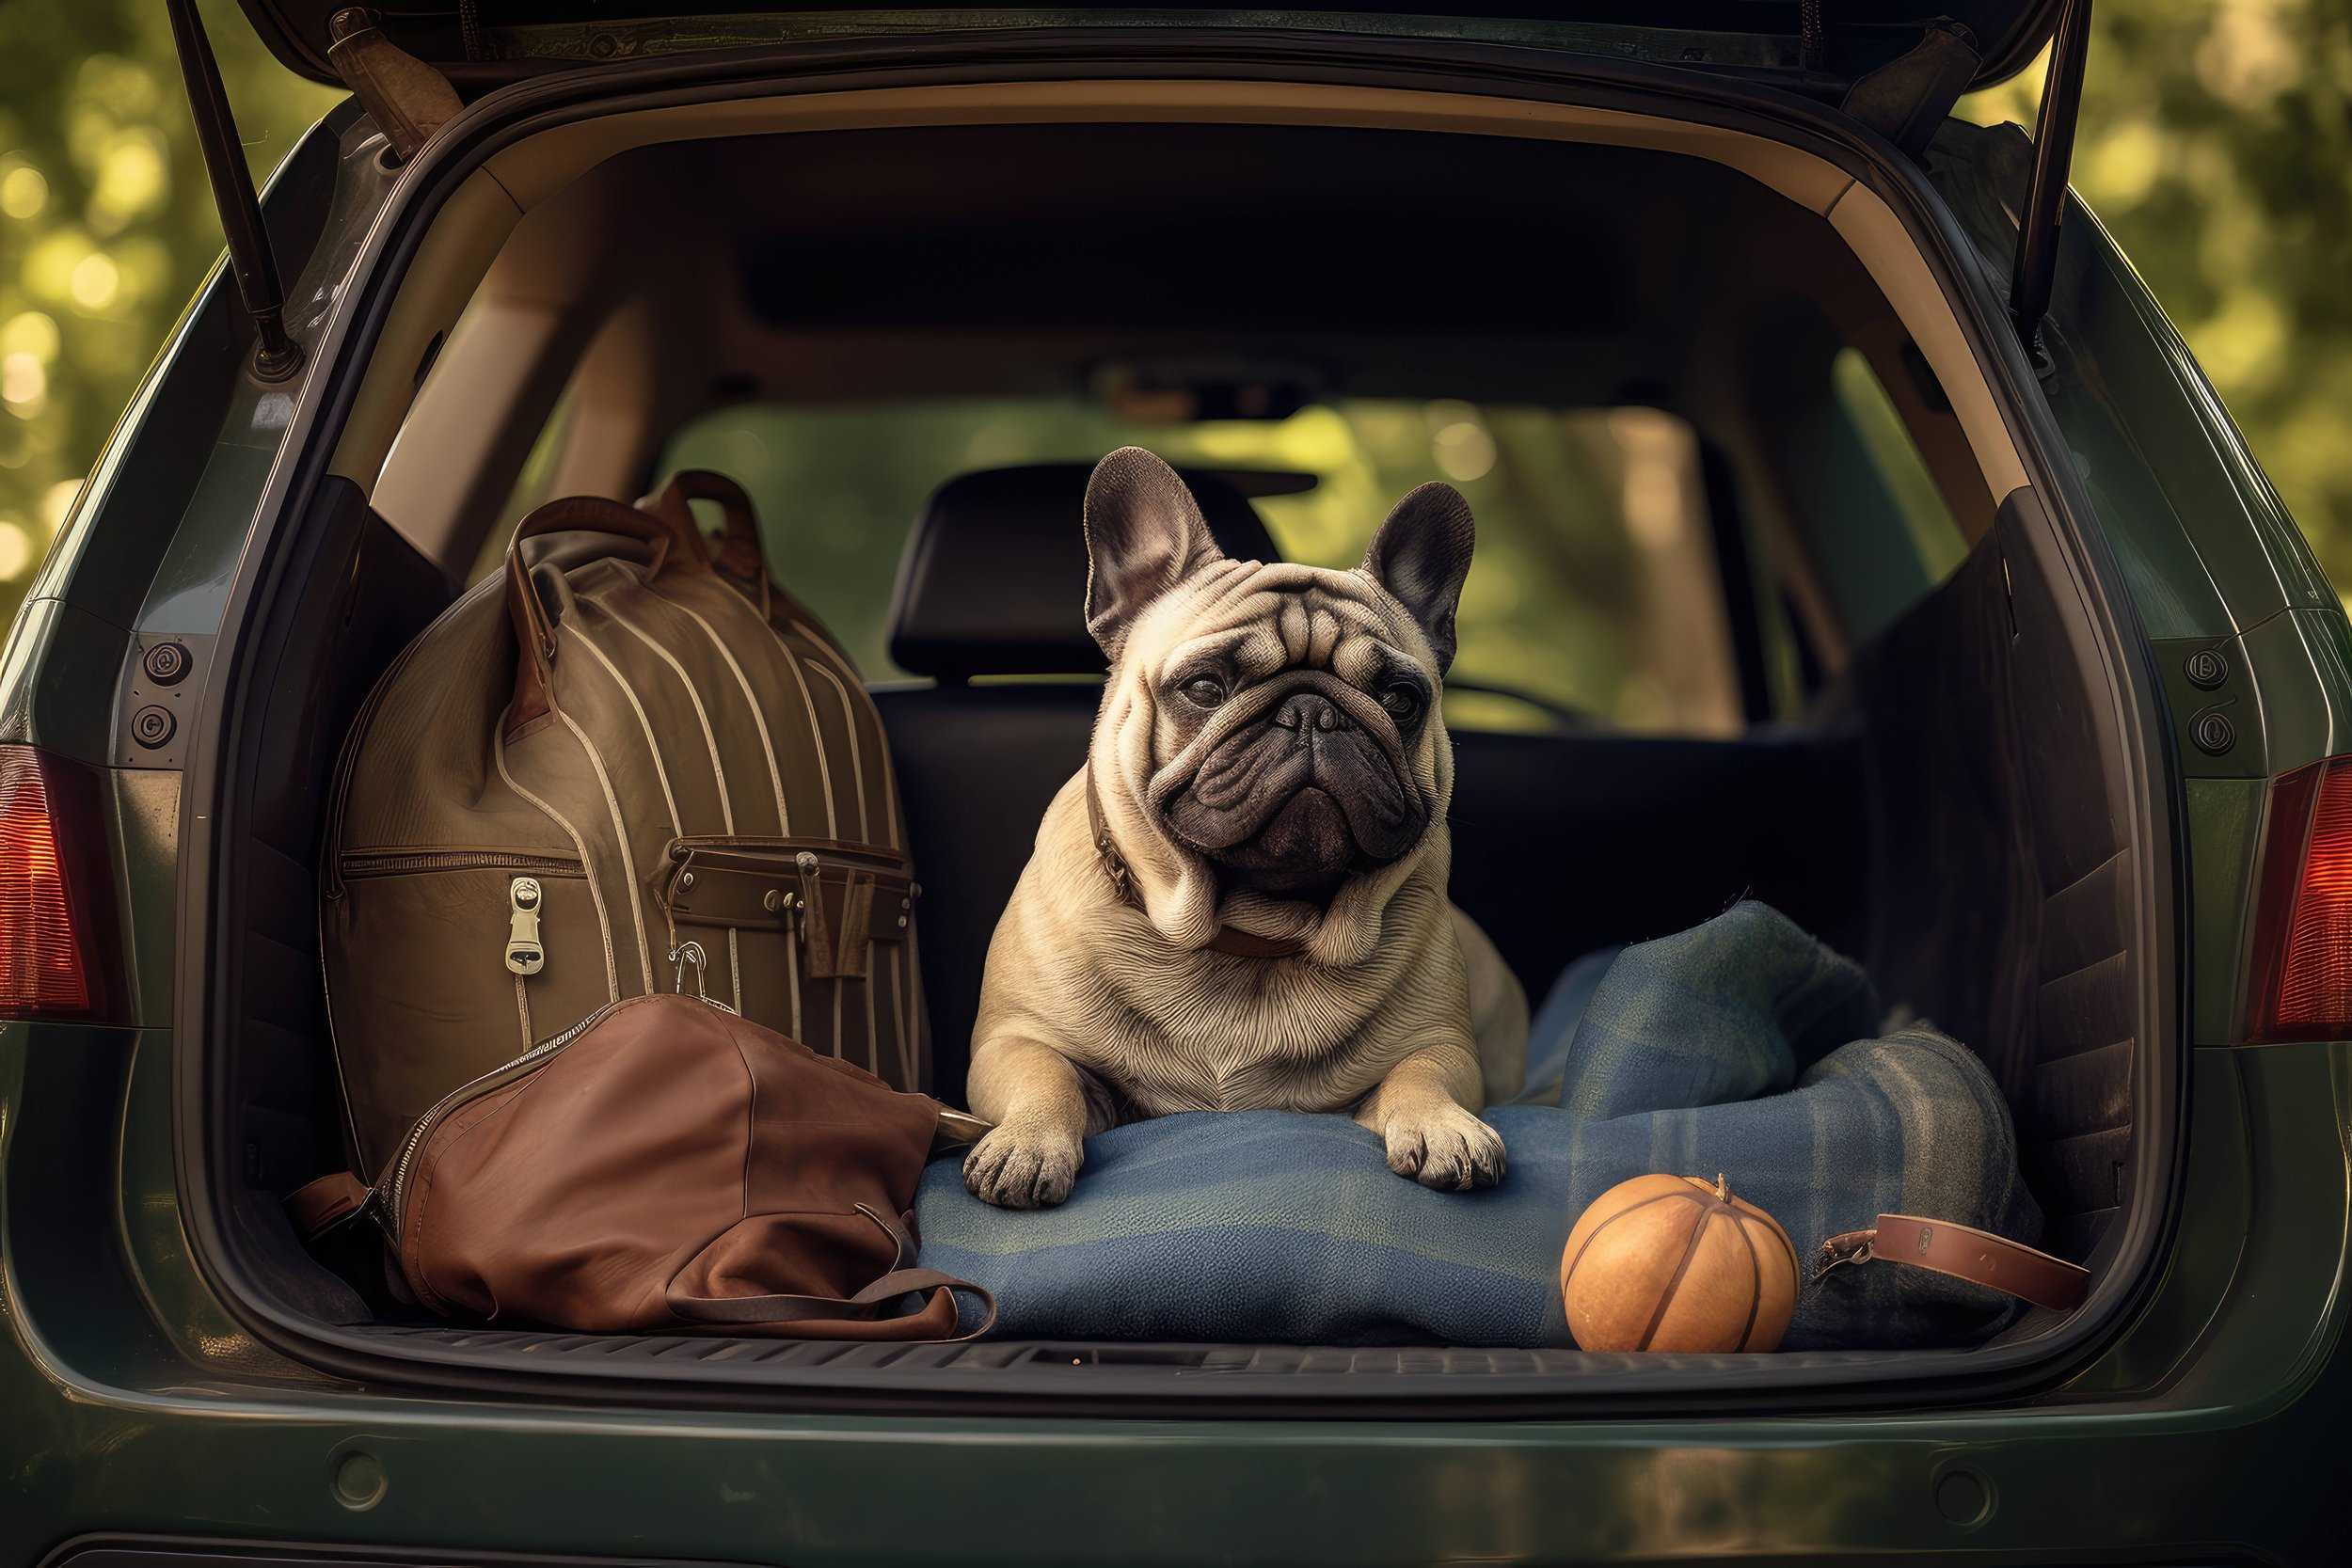 24Petwatch: Road trip essentials – must haves for you and your dog